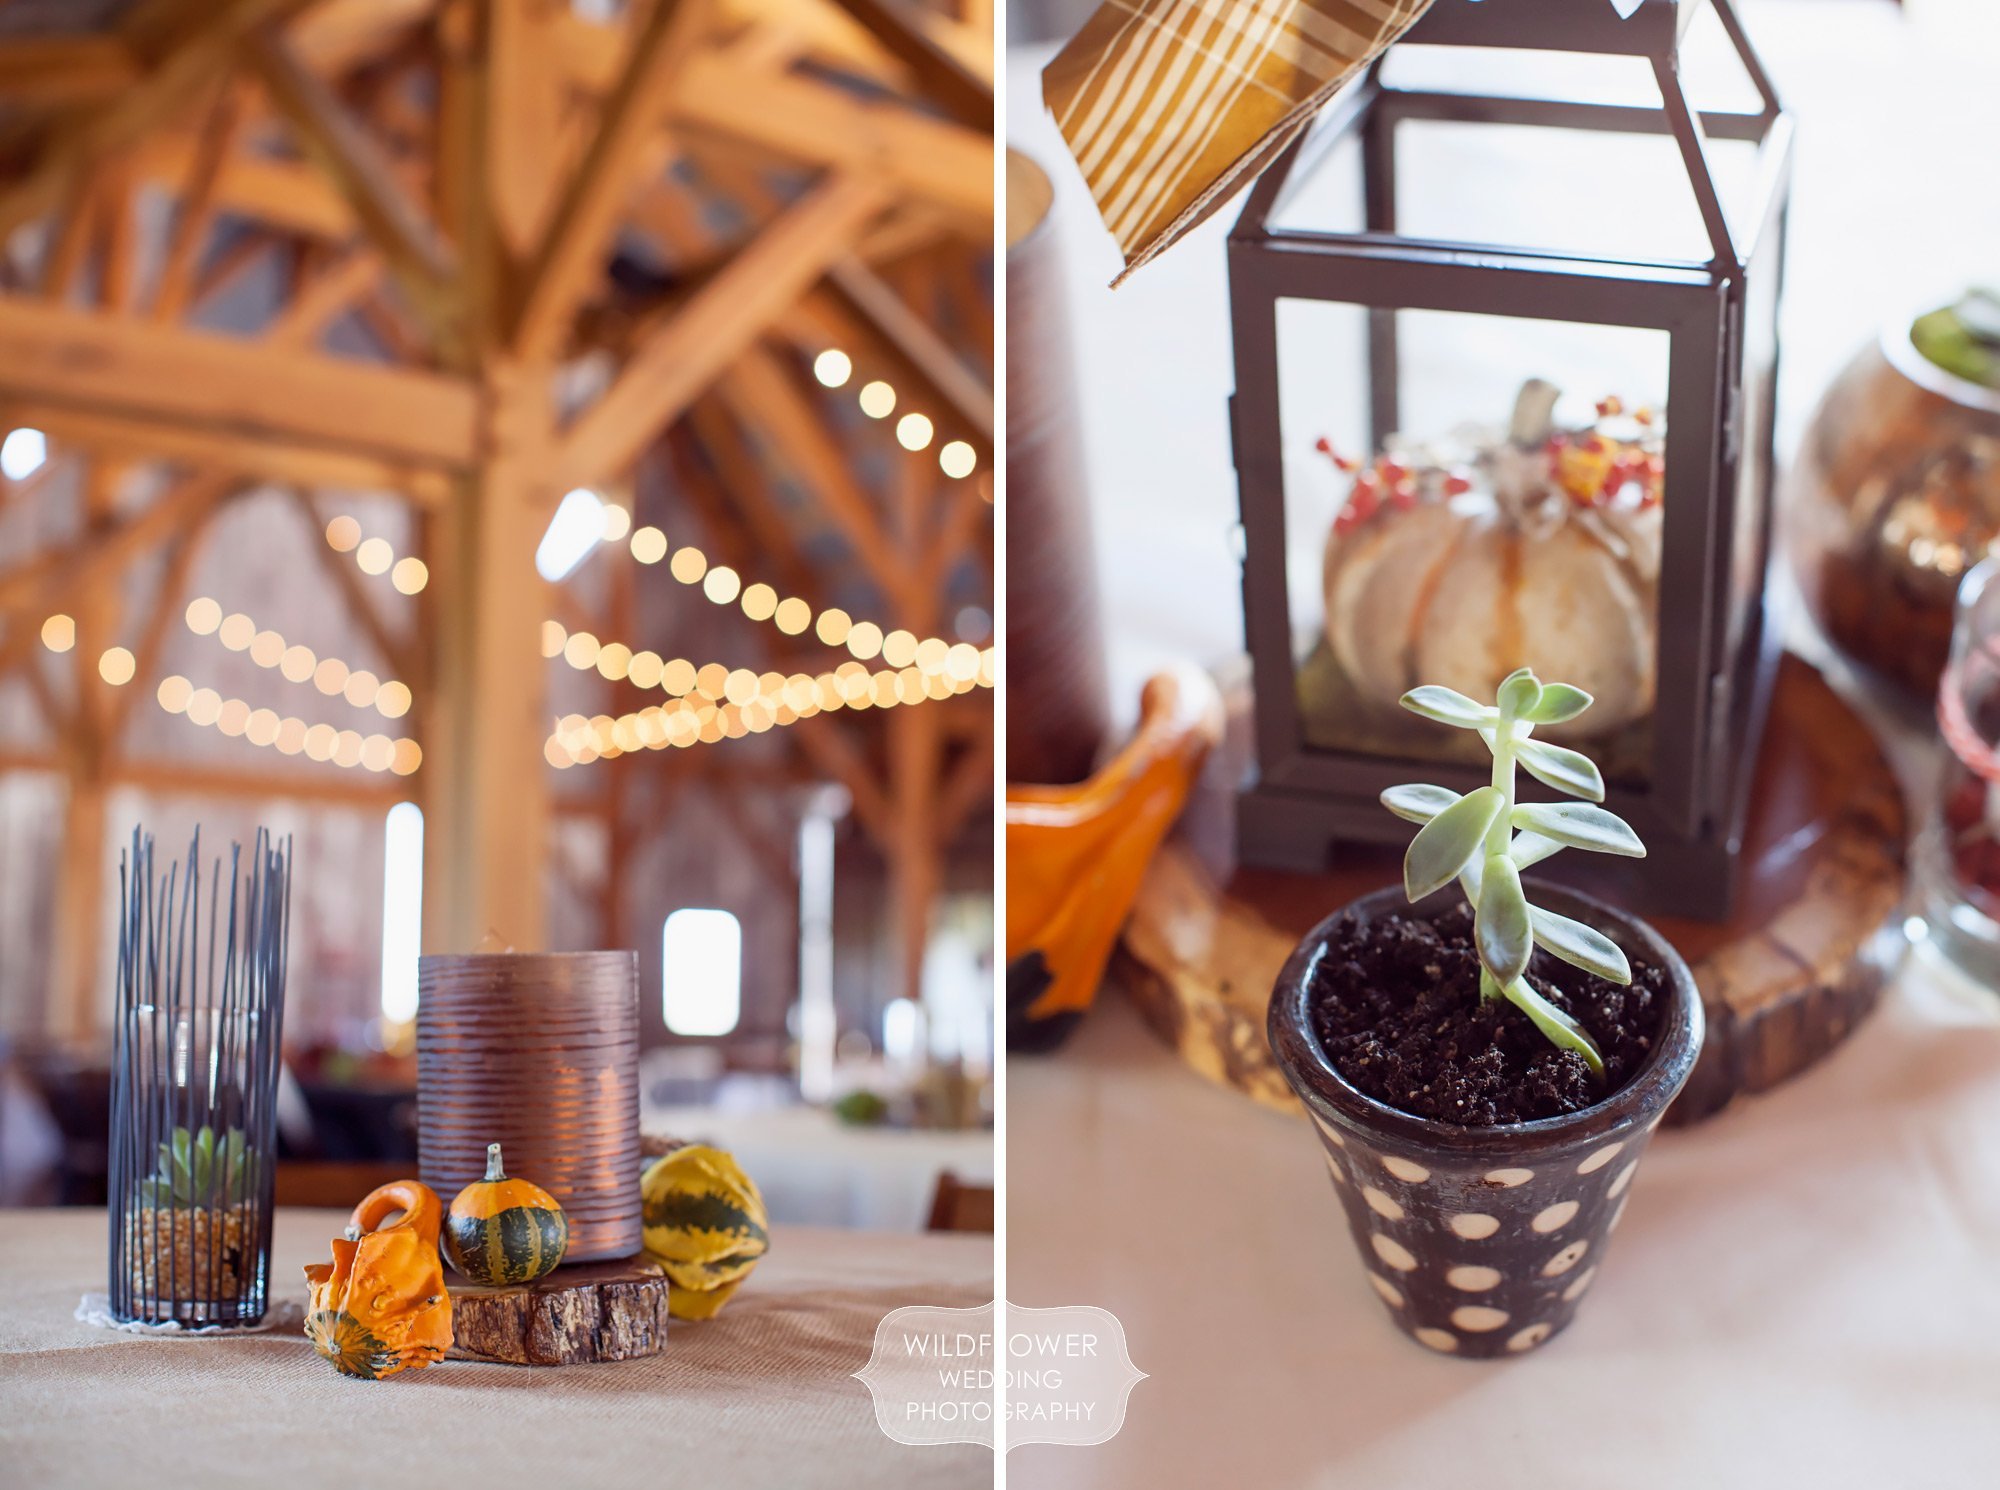 Succulent wedding centerpieces at this barn wedding in KC.